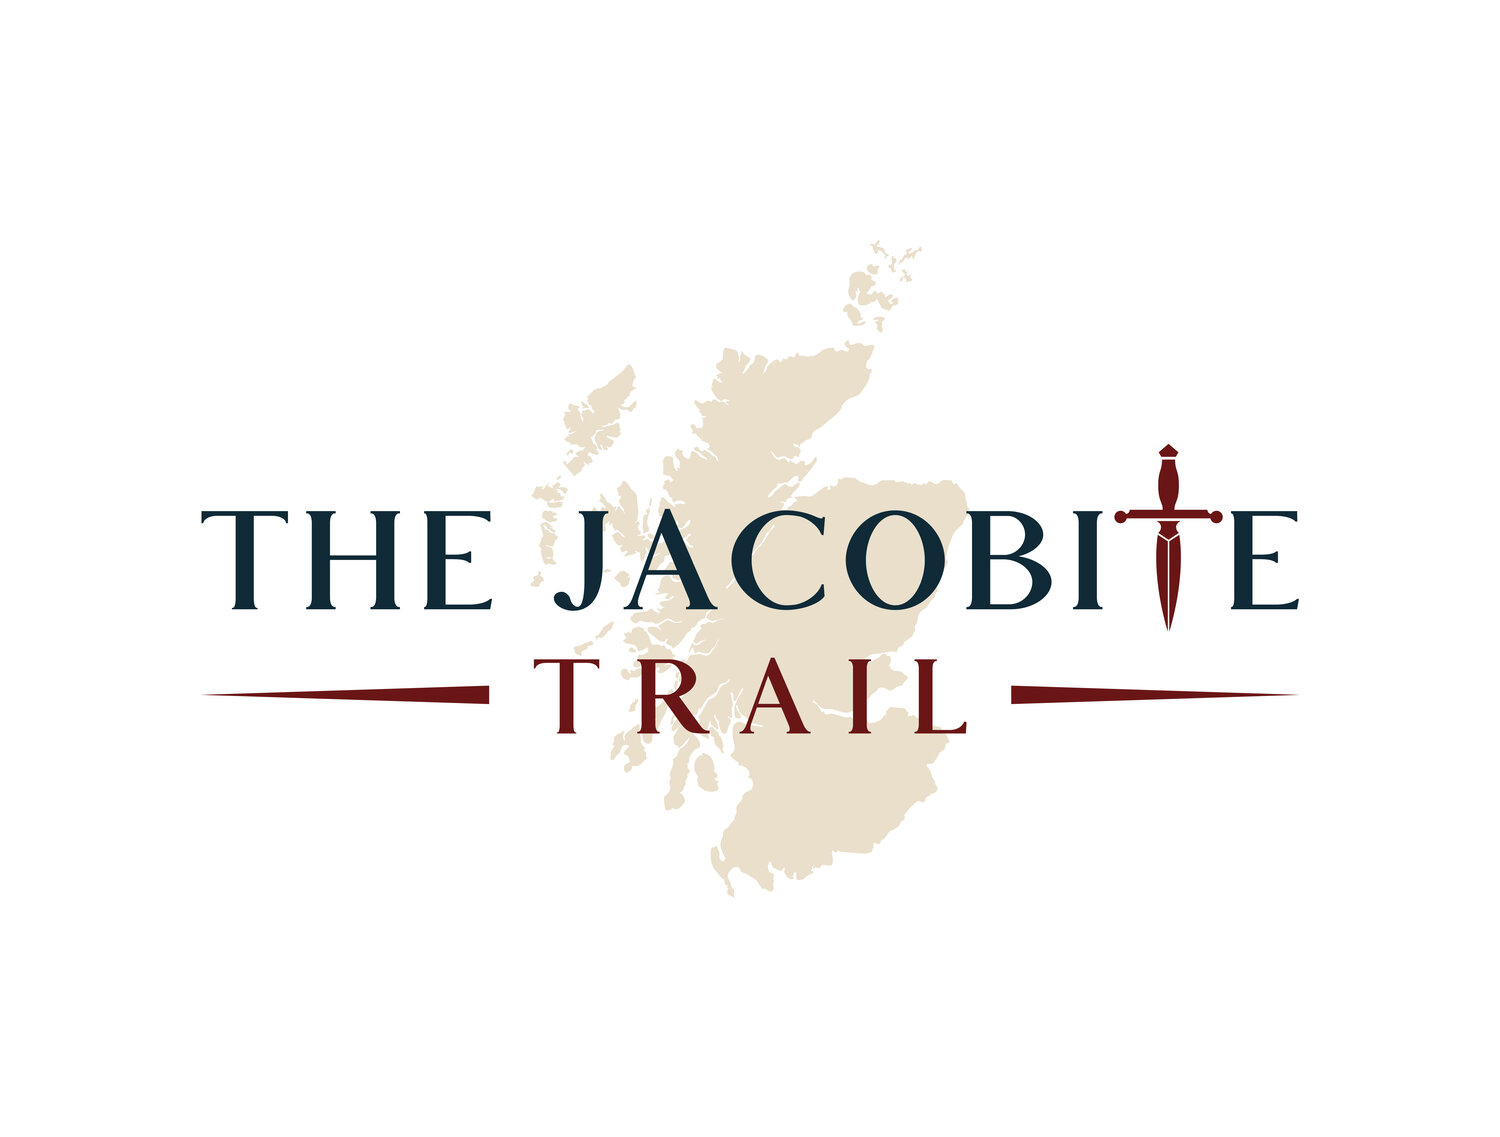 The Jacobite Trail